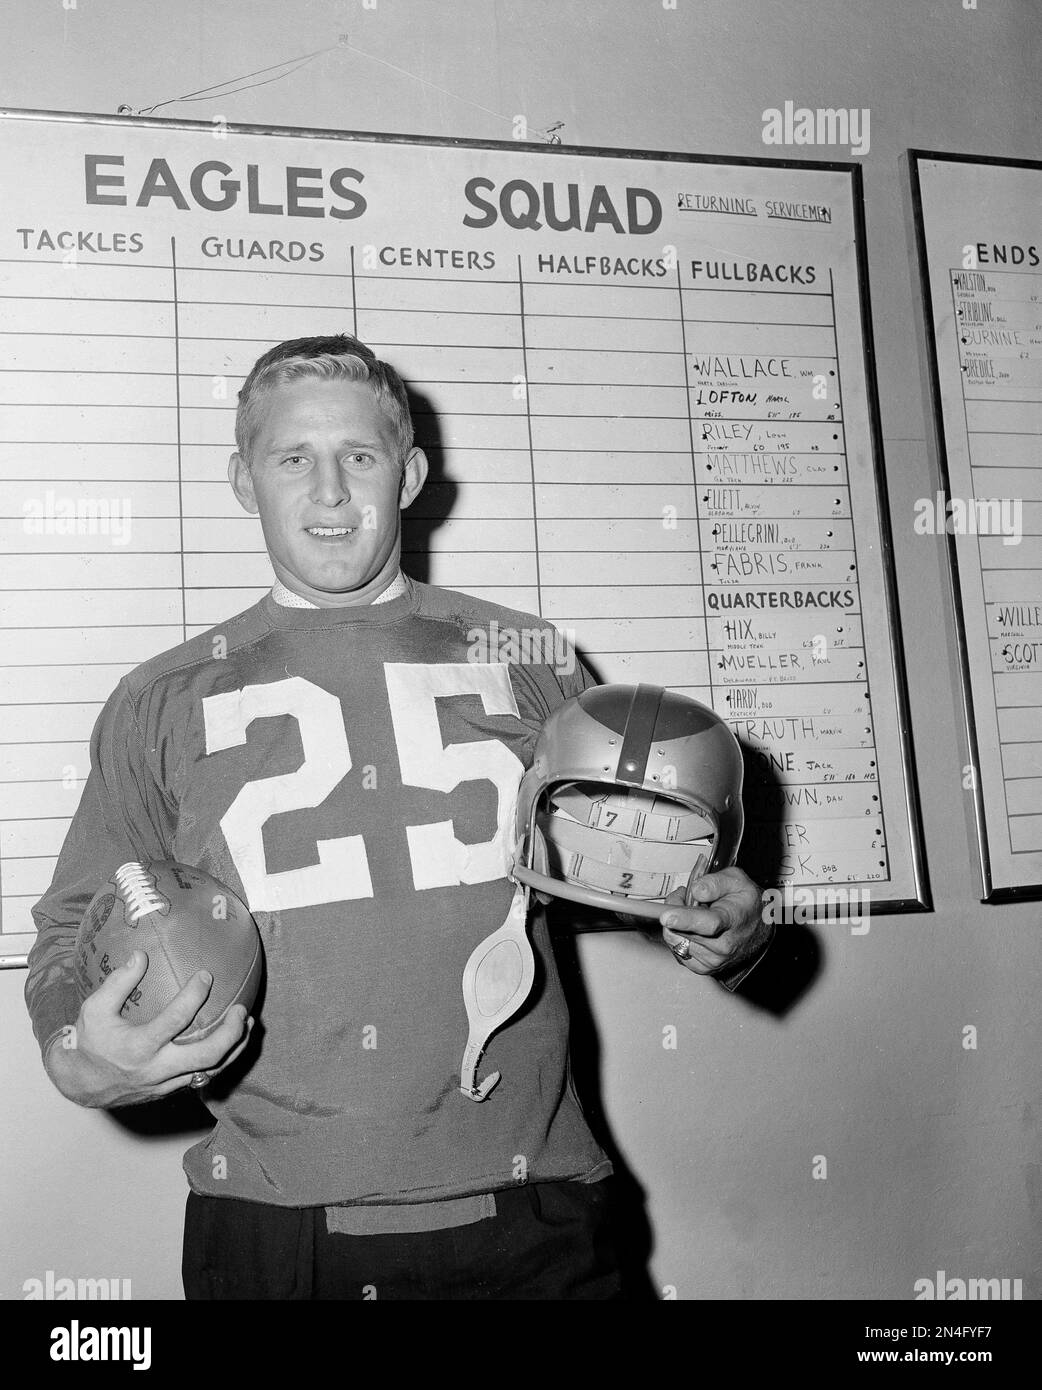 Tommy McDonald, All-America Oklahoma back, poses with a new number, head  gear and ball after he signed with the Philadelphia Eagles, Jan. 14, 1957,  to start a professional career in the NFL.